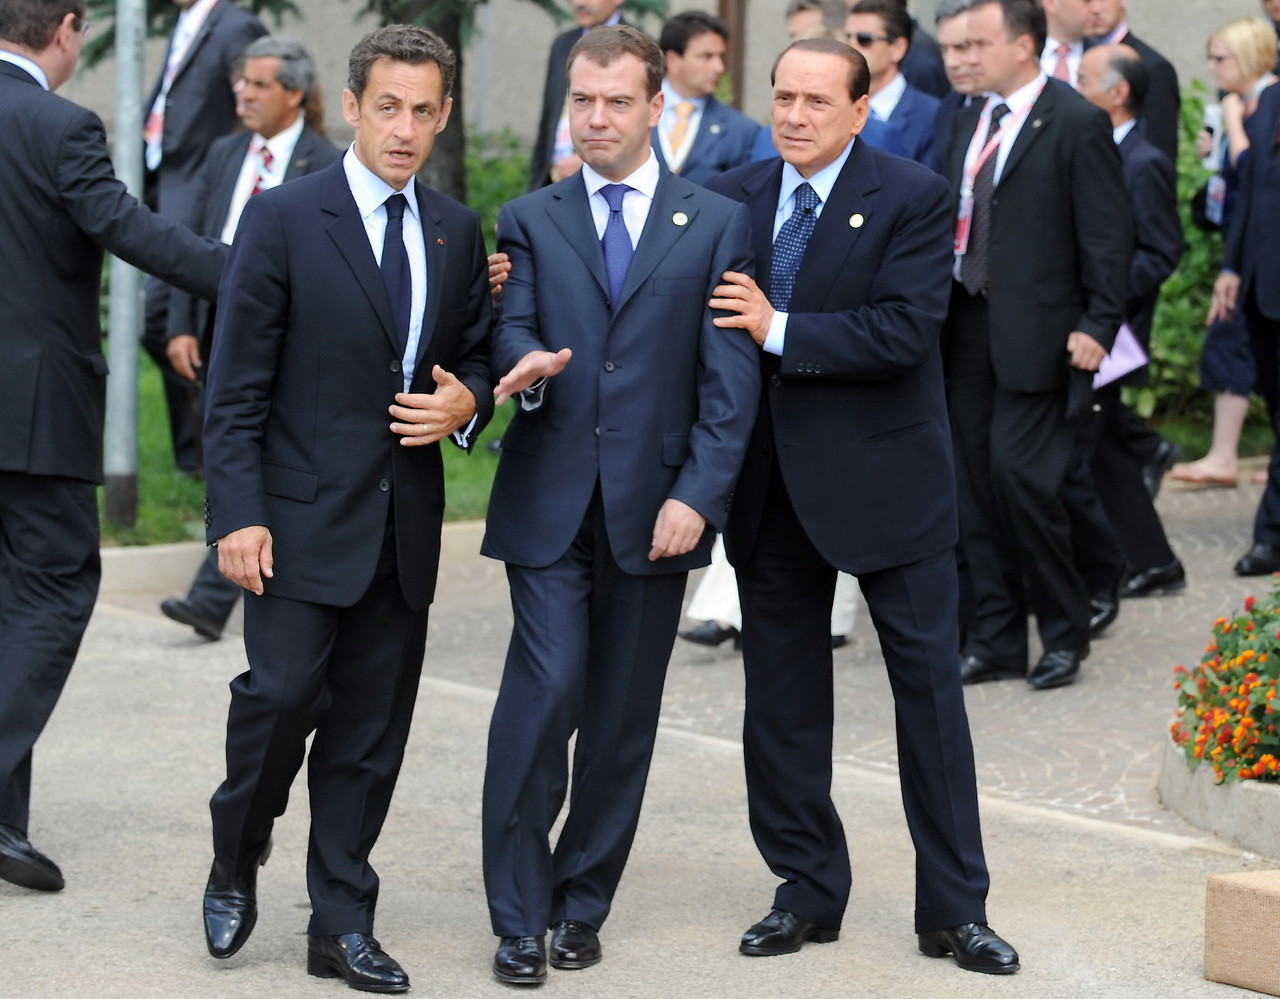 (L to R) French President Nicolas Sarkozy, Russian President Dmitri Medvedev, and Italian Prime Minister Silvio Berlusconi arrive to pose for a family photo at the Group of Eight (G8) summit in L'Aquila, central Italy, on July 8, 2009. Group of Eight leaders kick off talks today on issues ranging from the global financial crisis to climate change to the situations in Iran and Xinjiang, China. AFP PHOTO DDP/ POOL/ PEER GRIMM GERMANY OUT